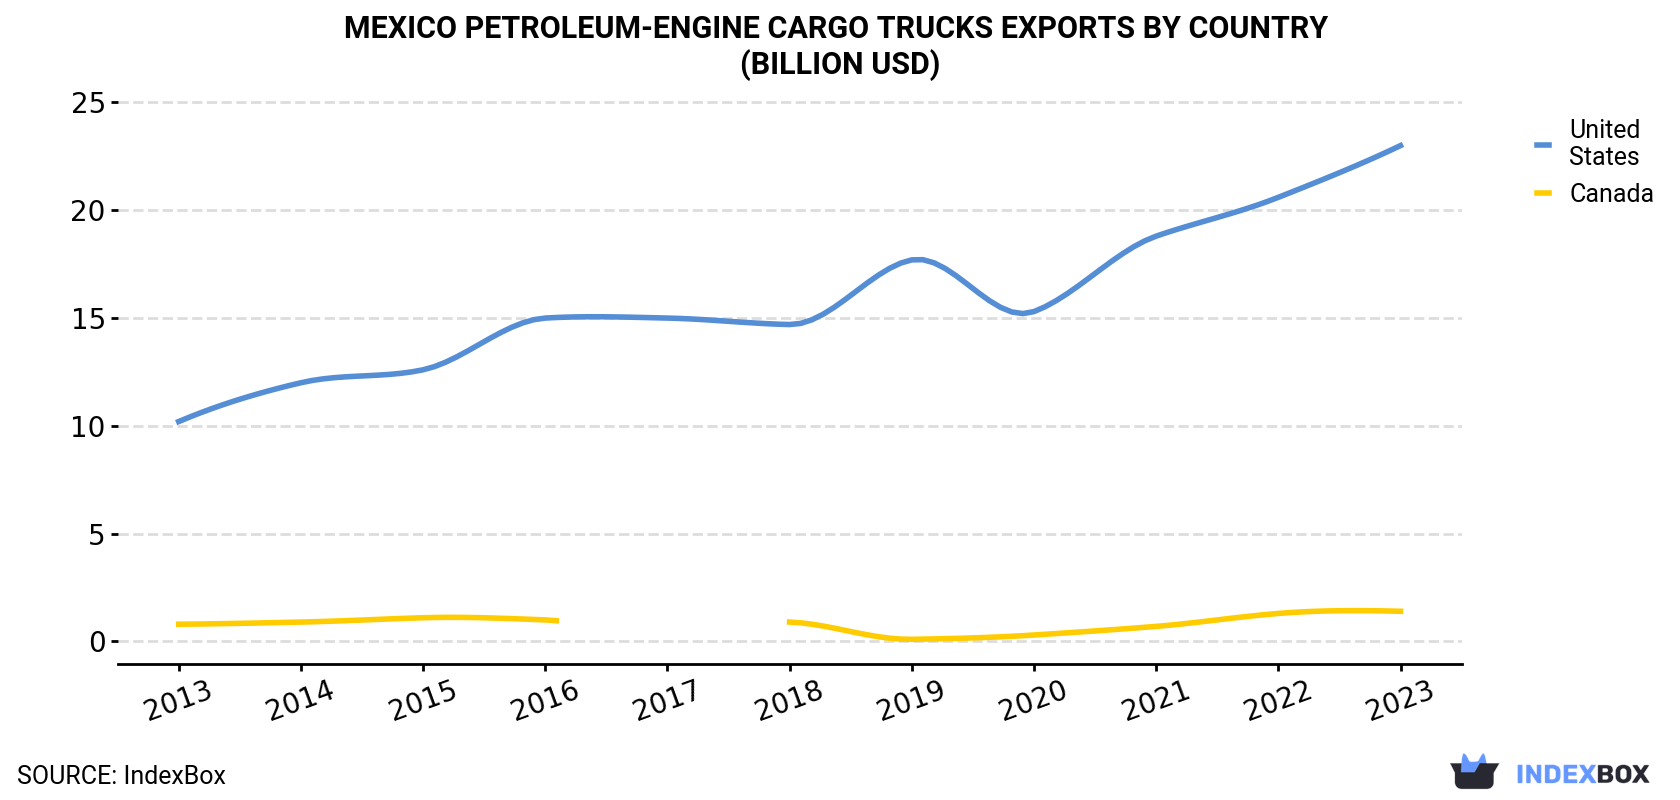 Mexico Petroleum-Engine Cargo Trucks Exports By Country (Billion USD)